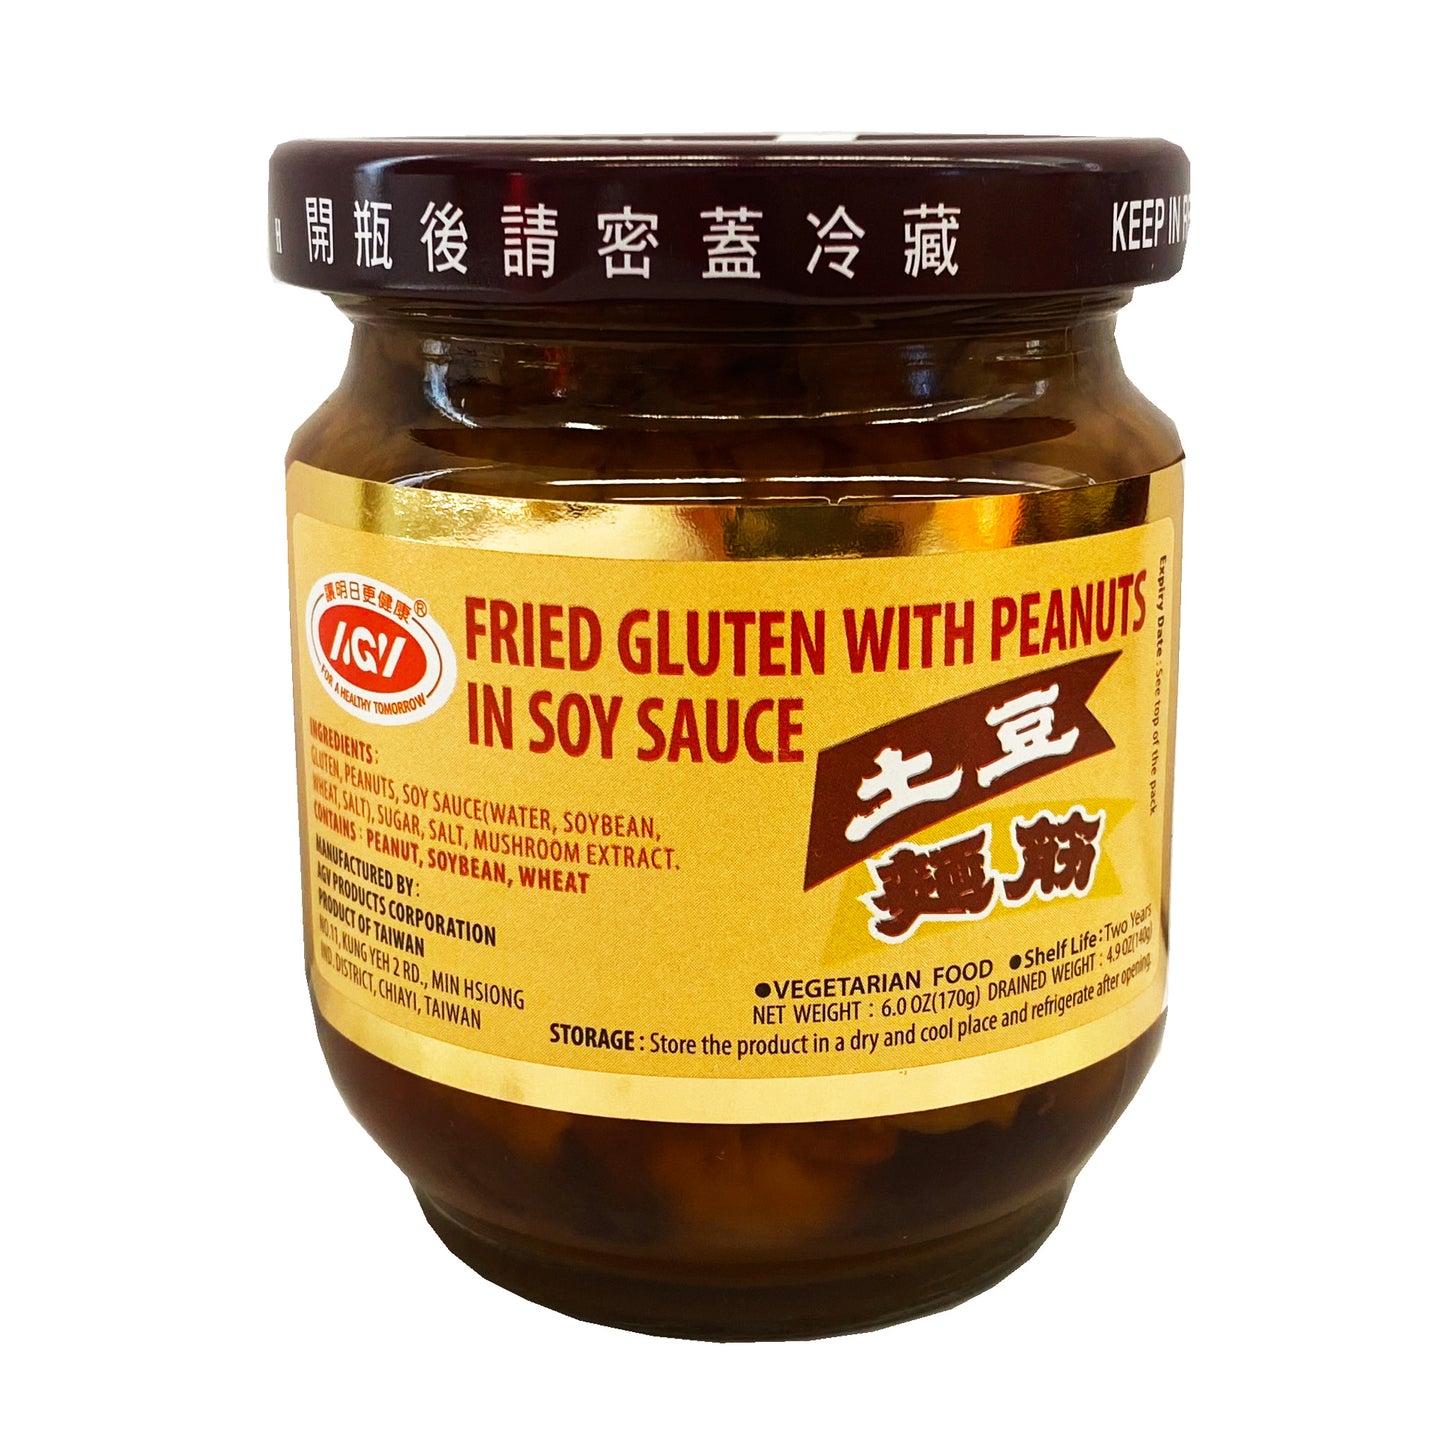 Front graphic image of AGV Fried Gluten With Peanuts In Soy Sauce 6oz - 爱之味 土豆面筋 6oz